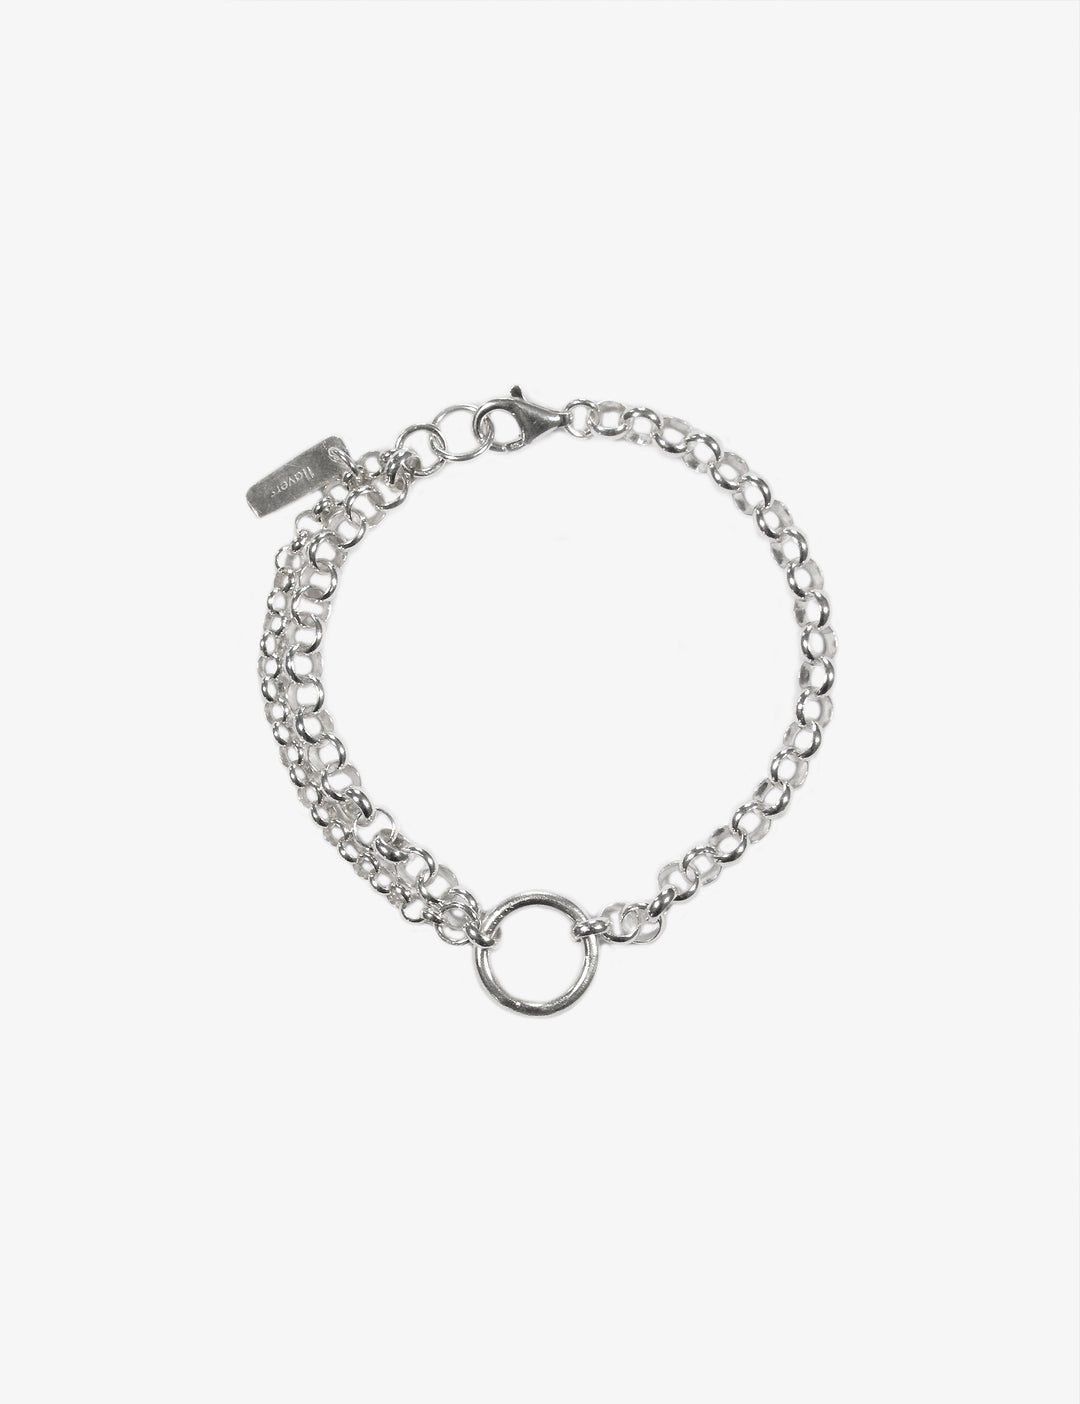 llayers refined jewelry Handmade men women silver chain bracelet with rings - Made In Brookyn New York